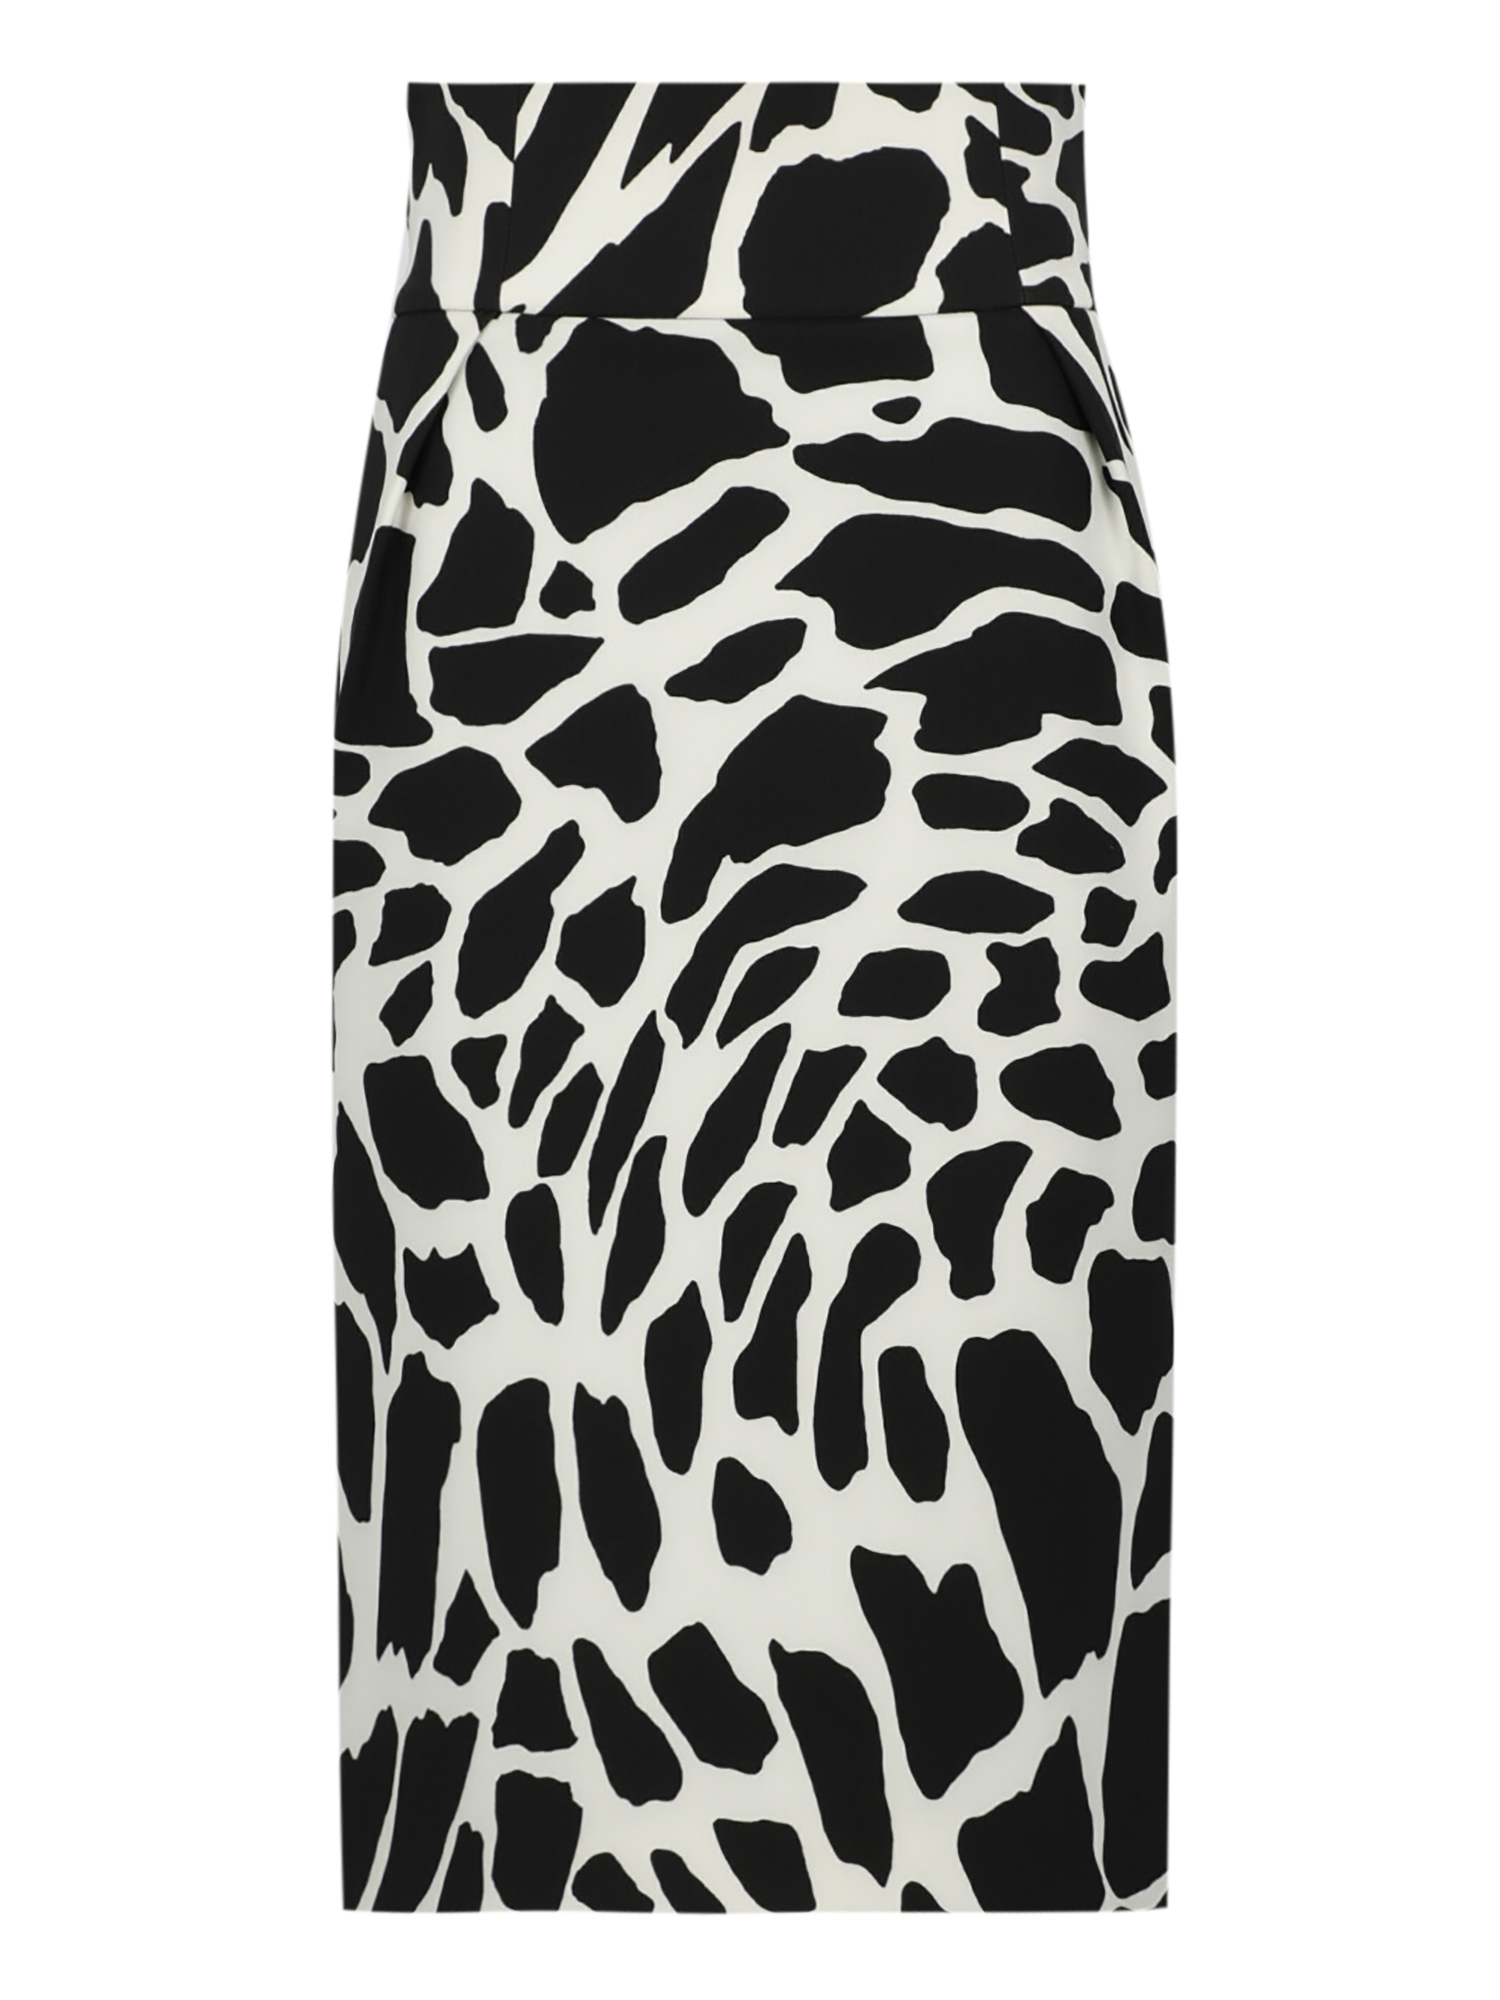 Condition: Excellent, Animal Print Synthetic Fibers, Color: Black, White - M - FR 40 -